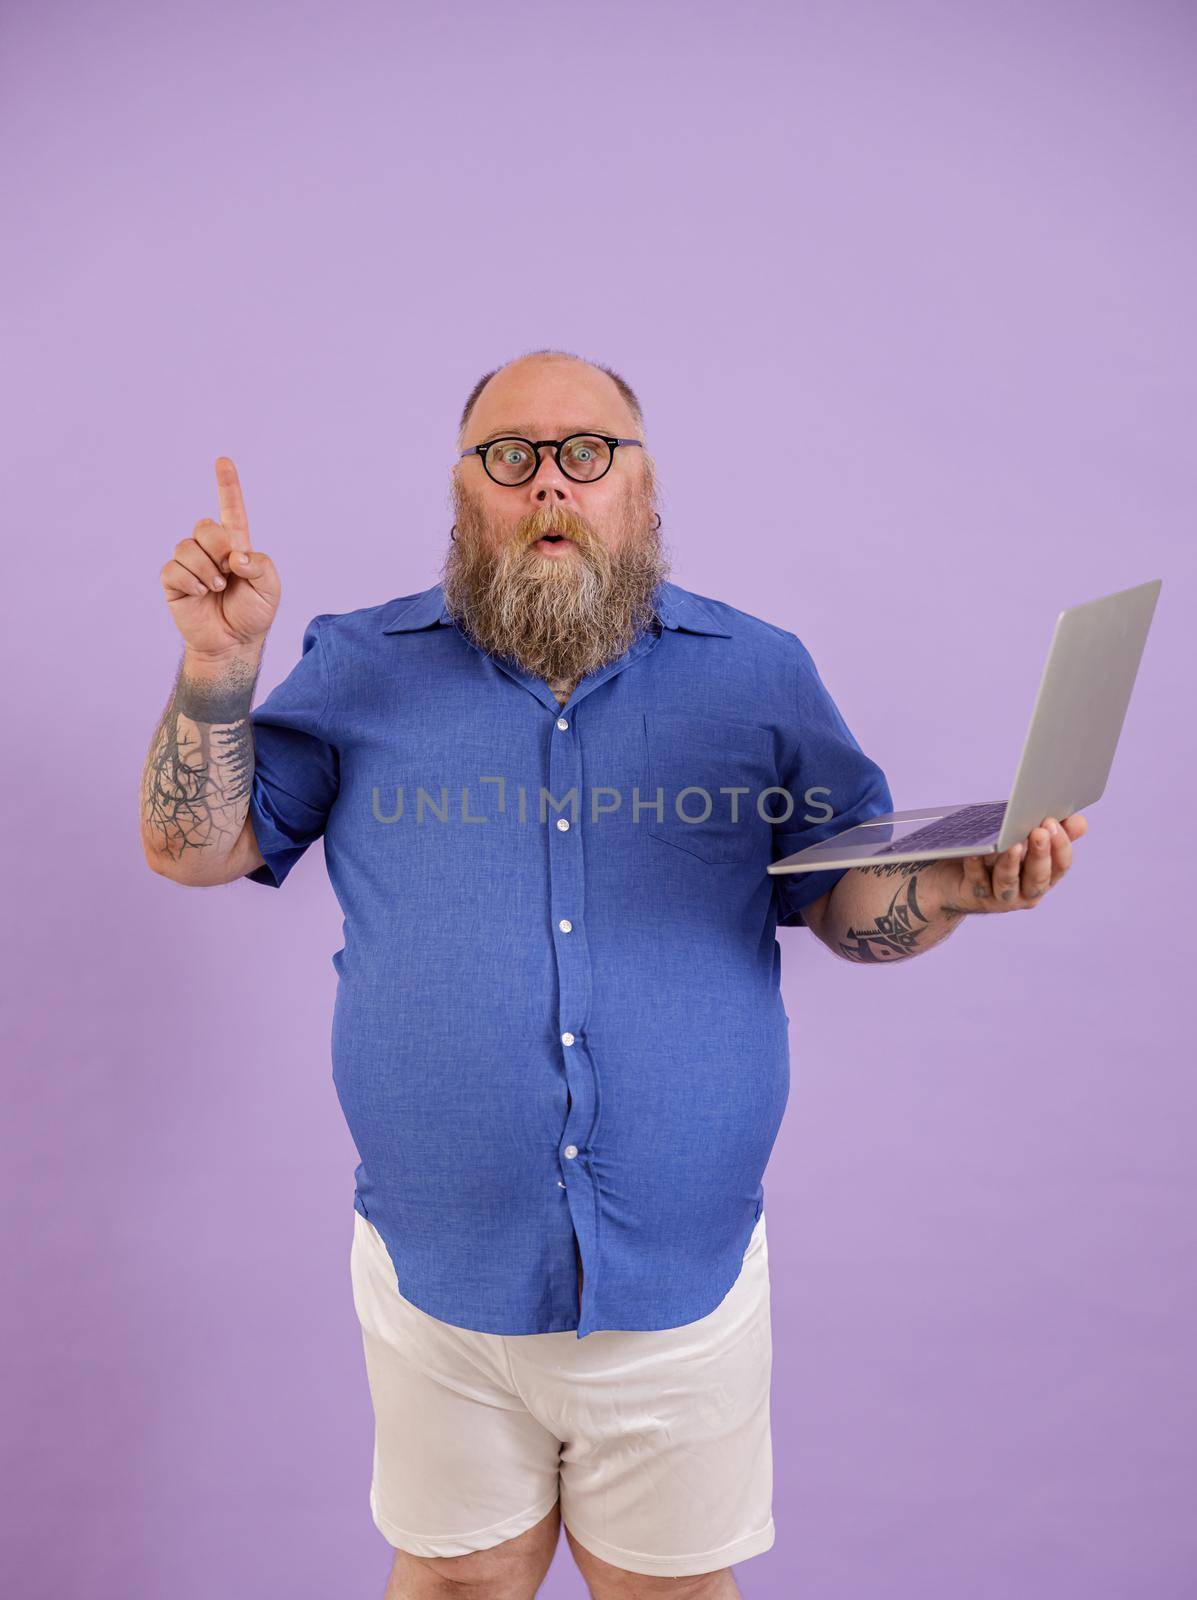 Funny man with overweight got interesting idea holding laptop on purple background by Yaroslav_astakhov